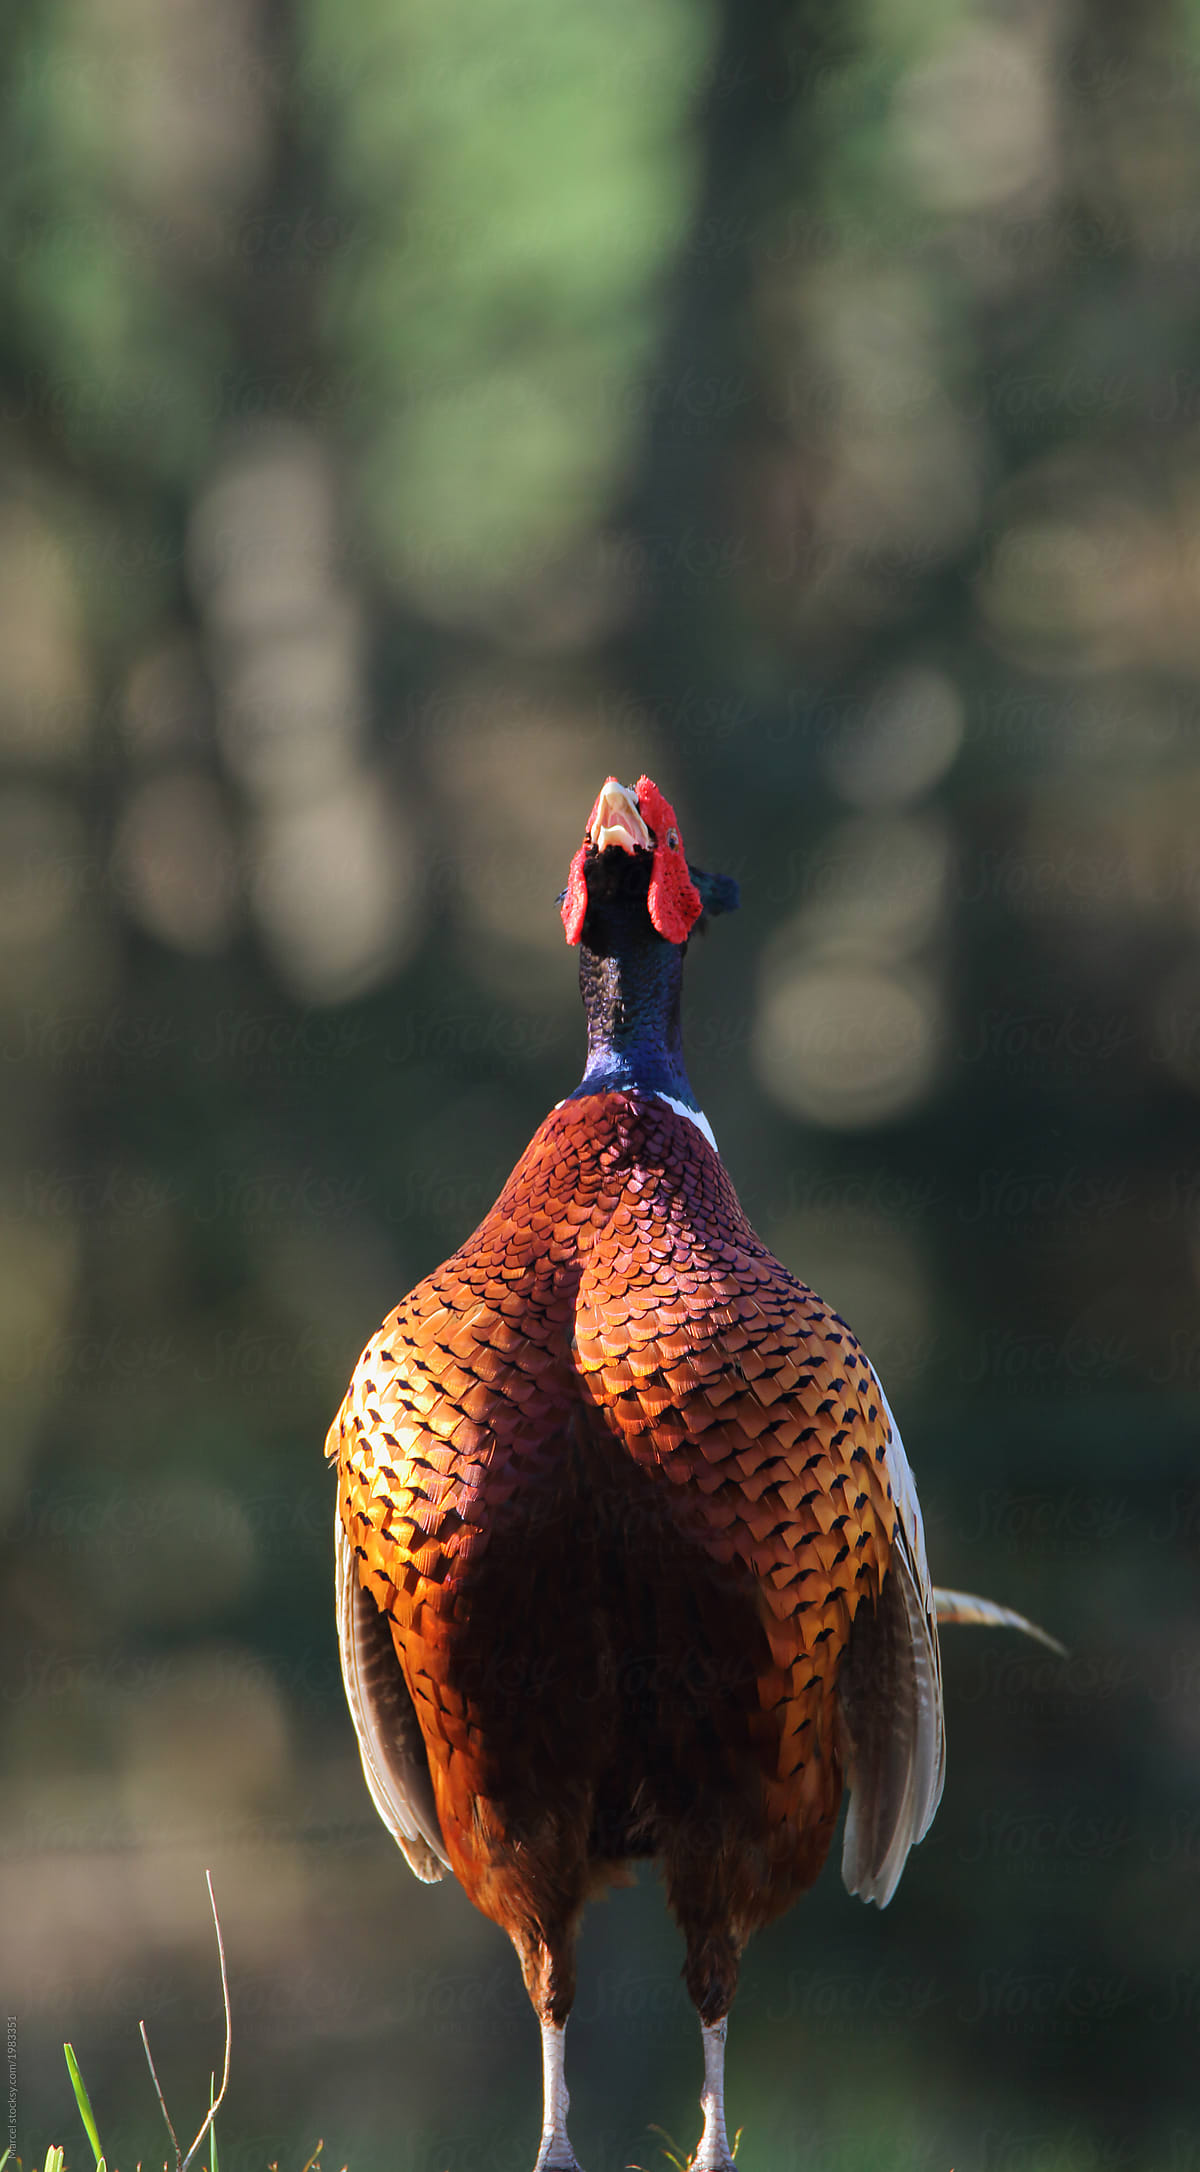 Male pheasant making his call in spring